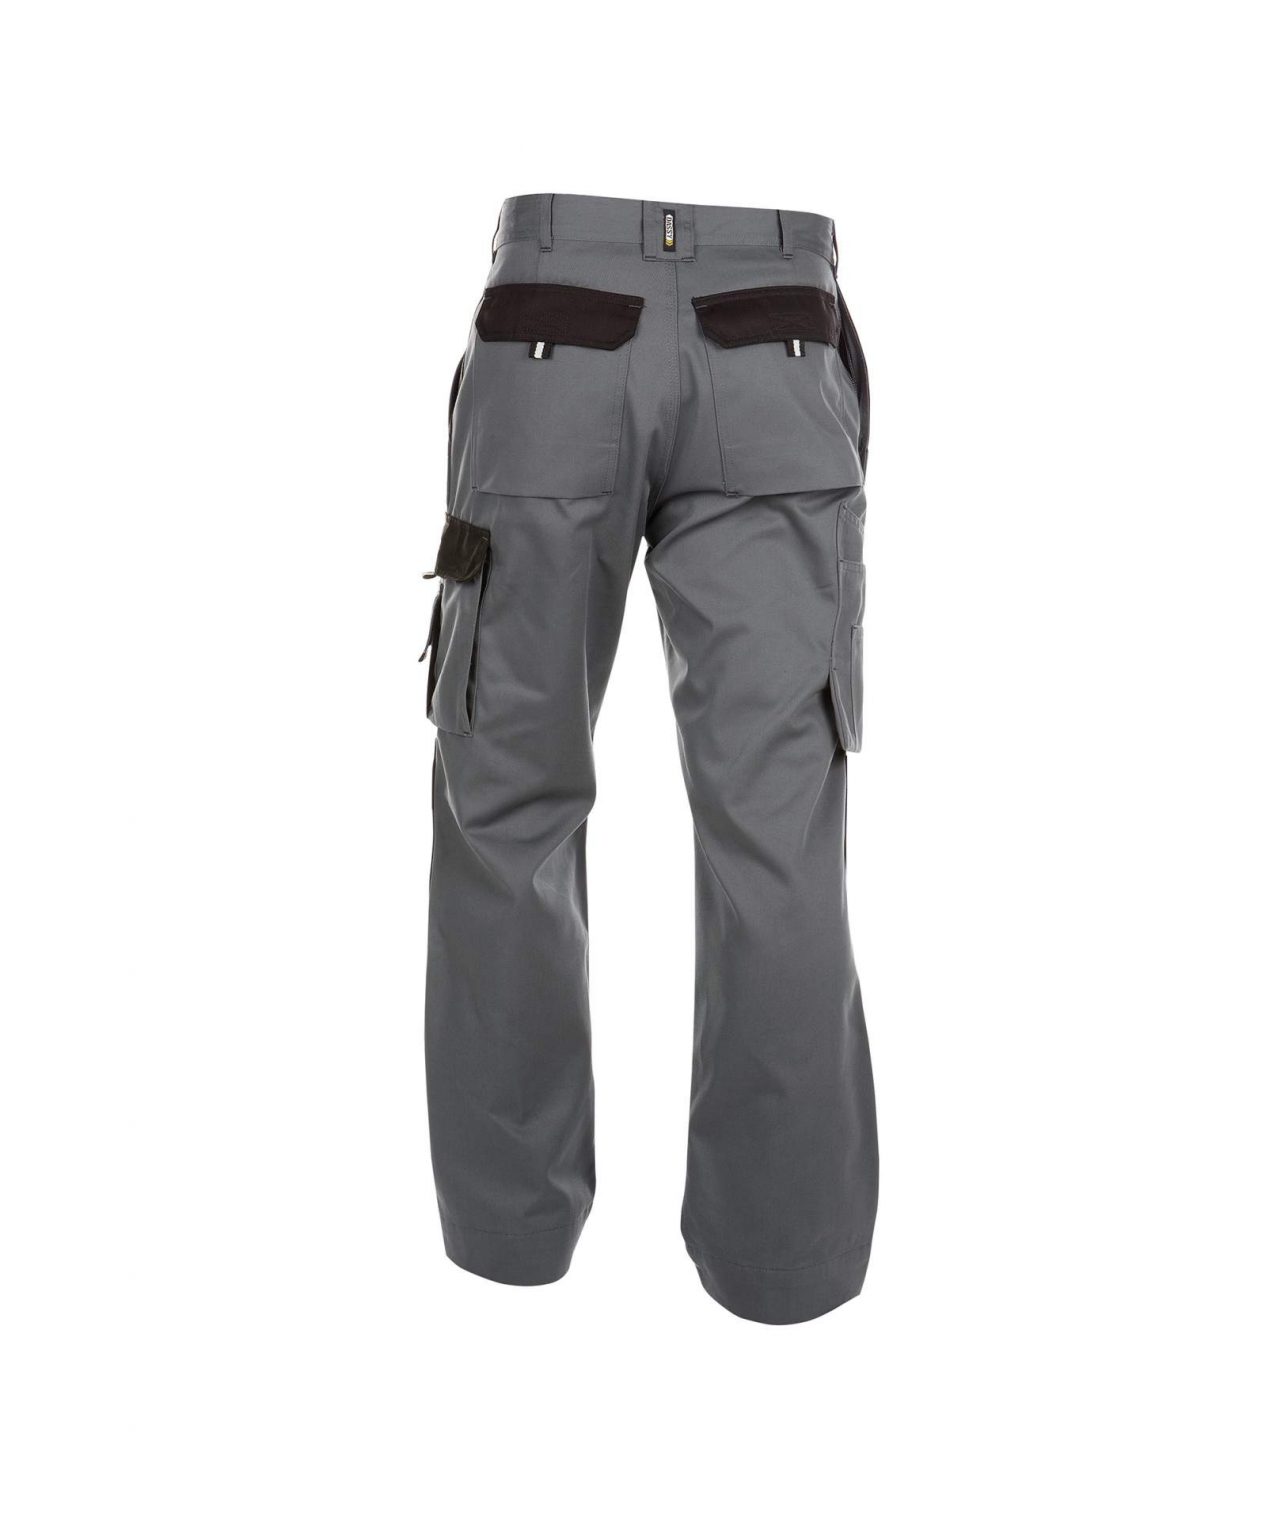 boston two tone work trousers with knee pockets cement grey black back